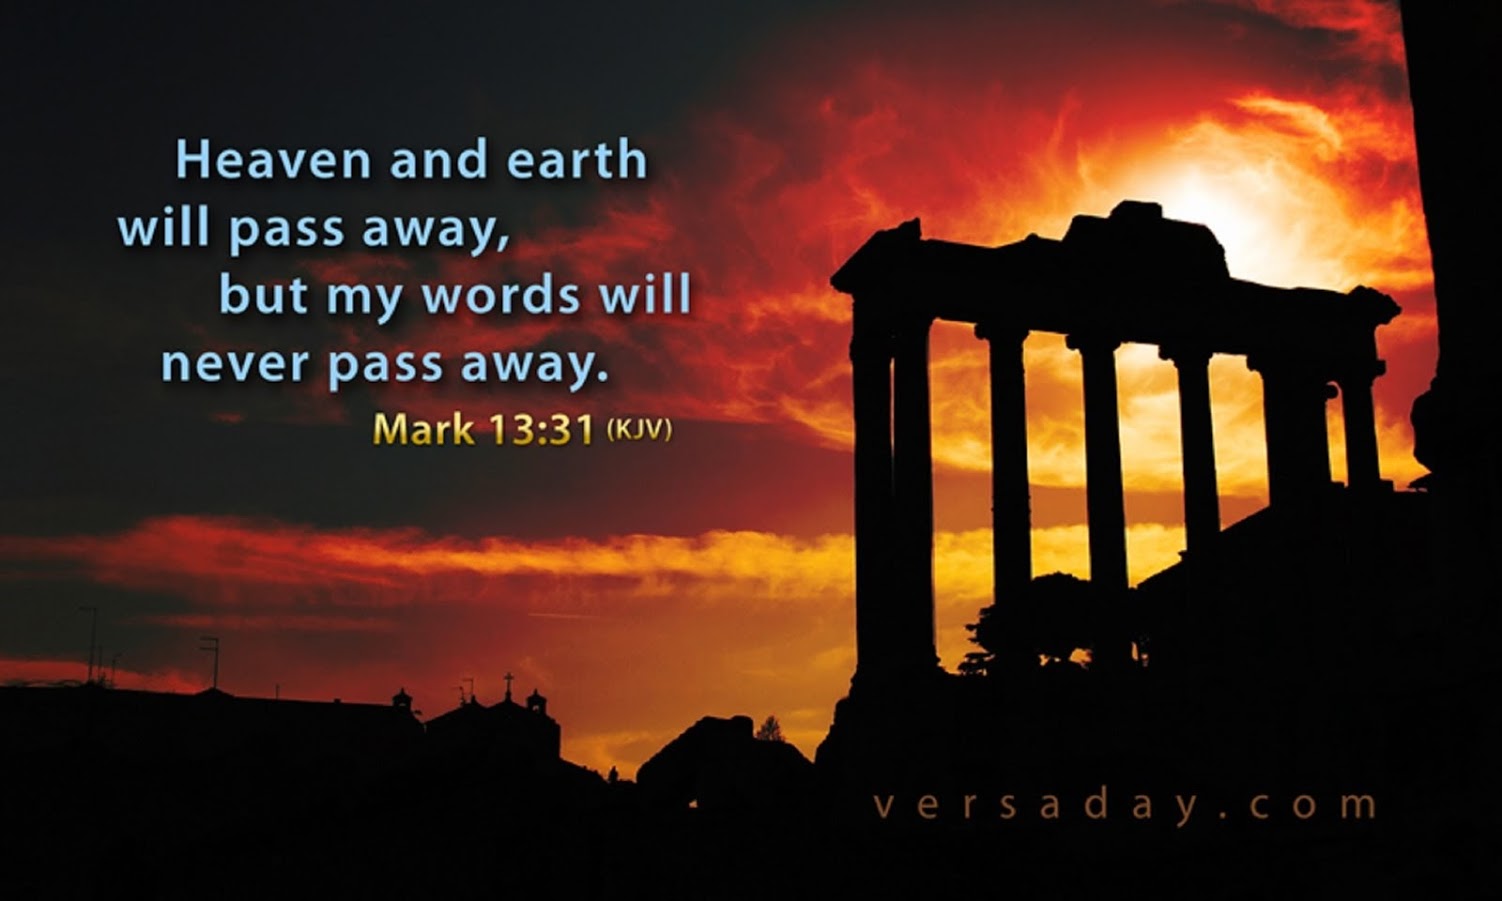 HEAVEN AND EARTH WILL PASS AWAY BUT MY WORDS WILL NEVER PASS AWAY